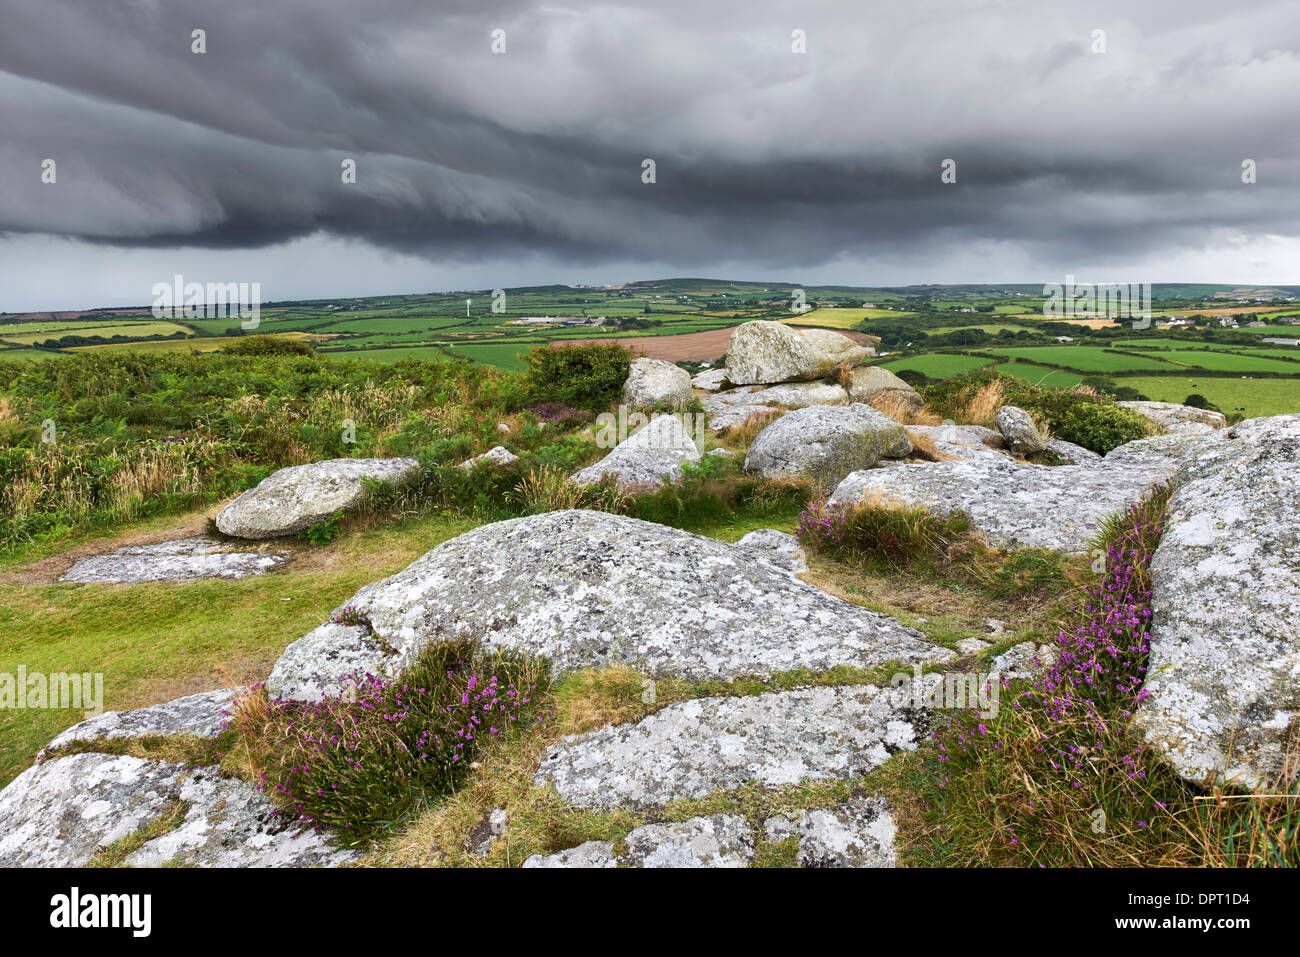 Storm clouds gathering above the Cornish countryside, West Cornwall Stock Photo